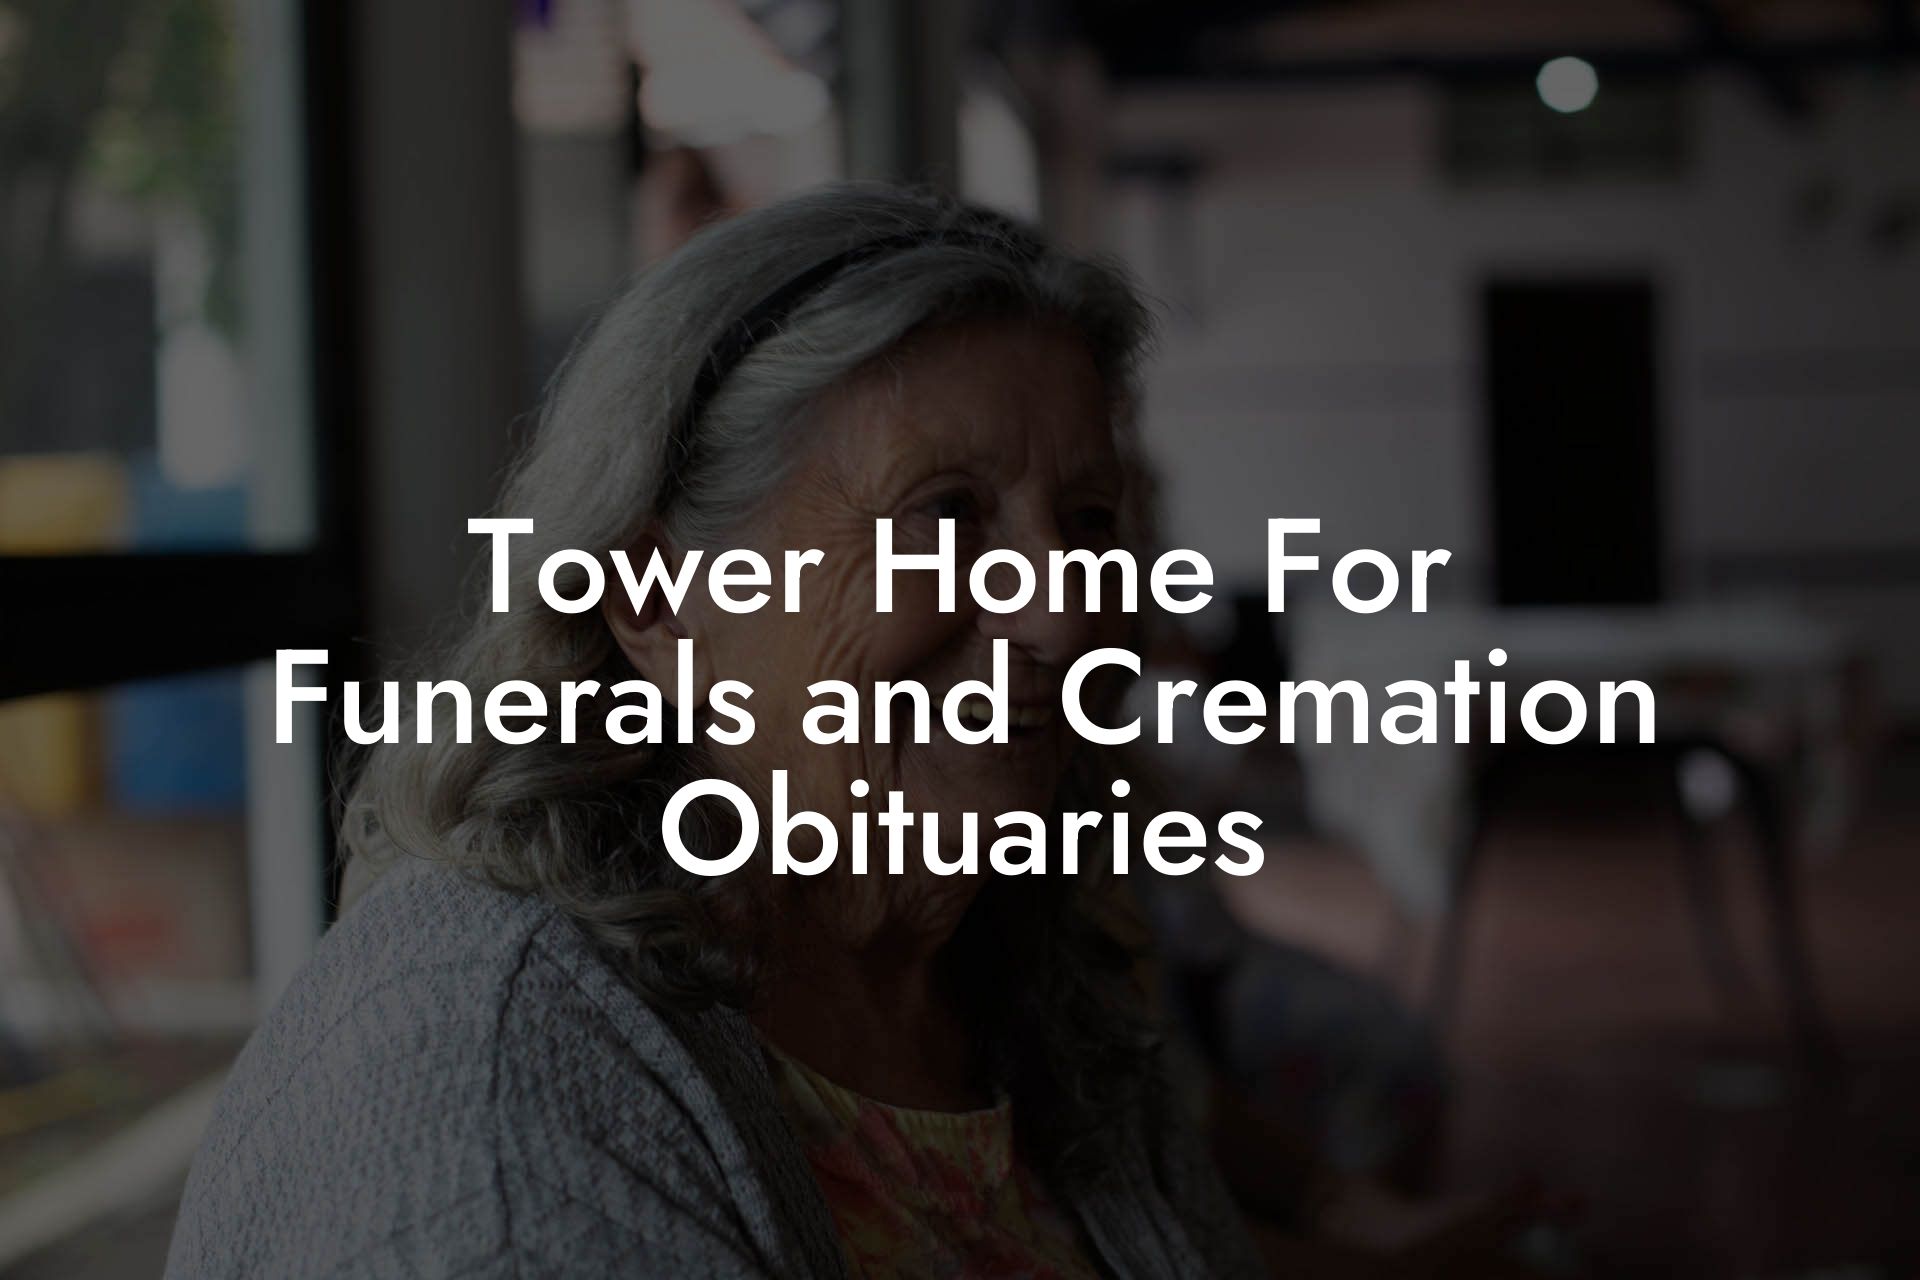 Tower Home For Funerals and Cremation Obituaries